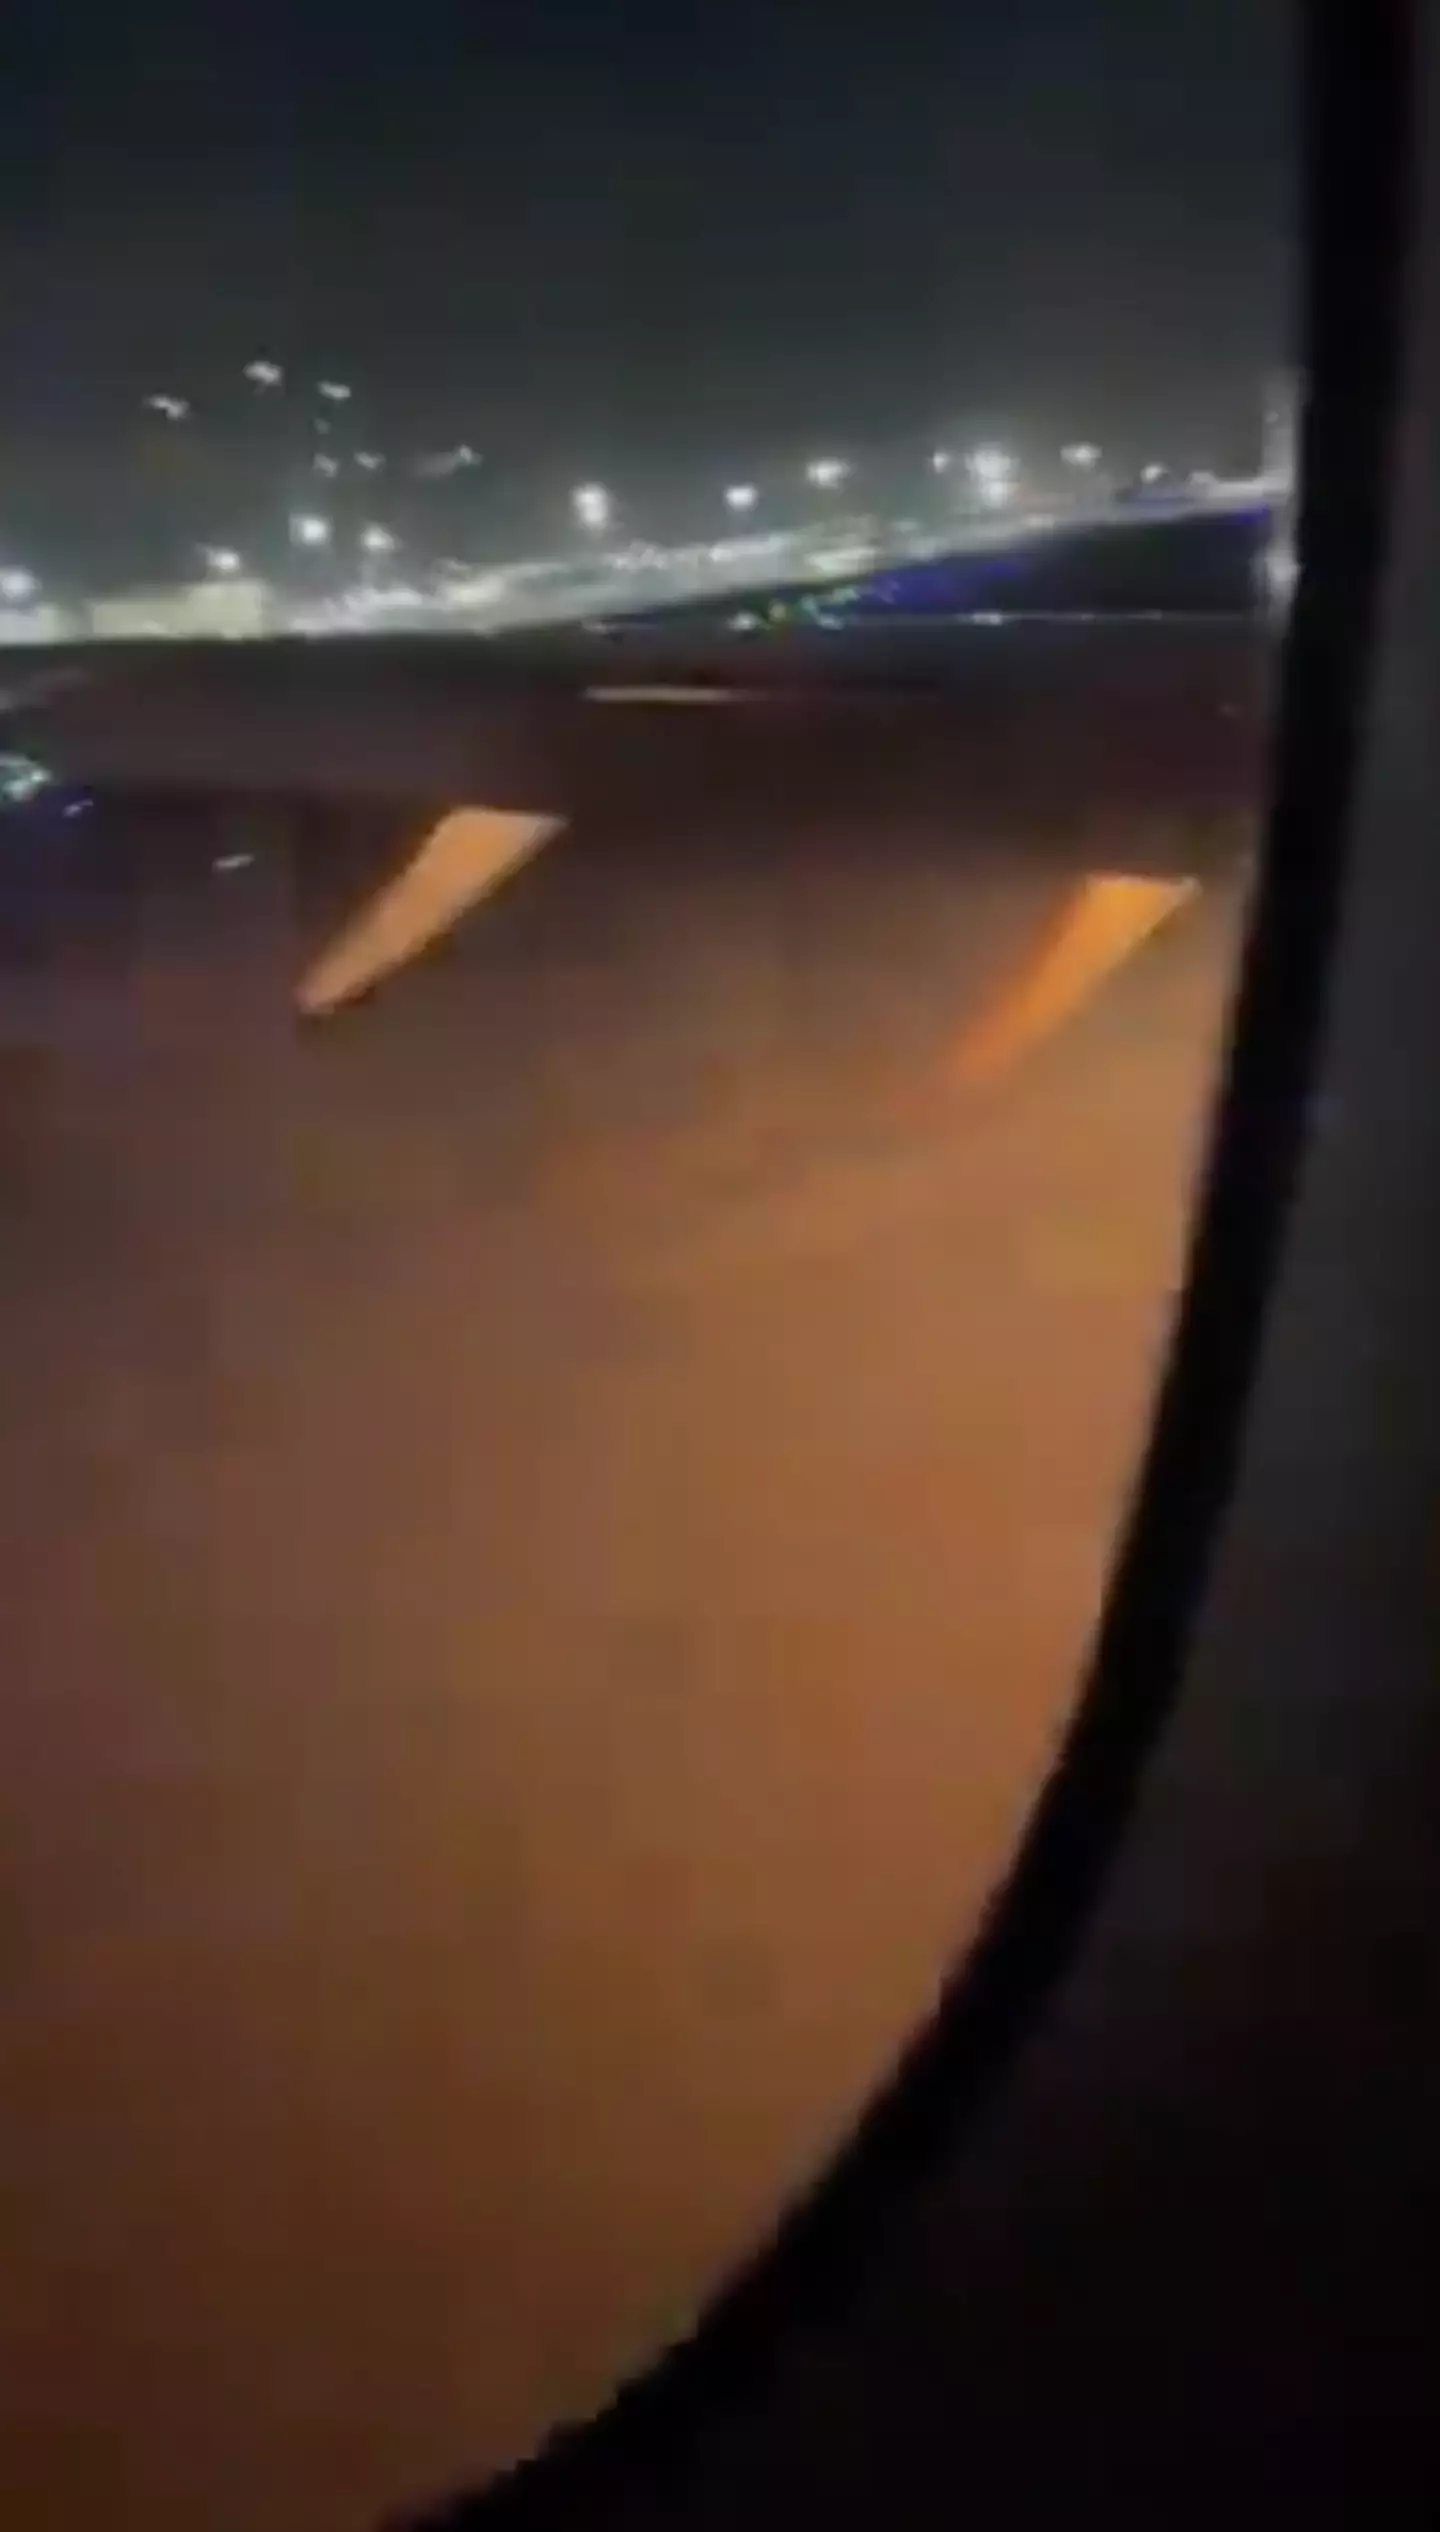 One clip shows smoke coming from the plane.